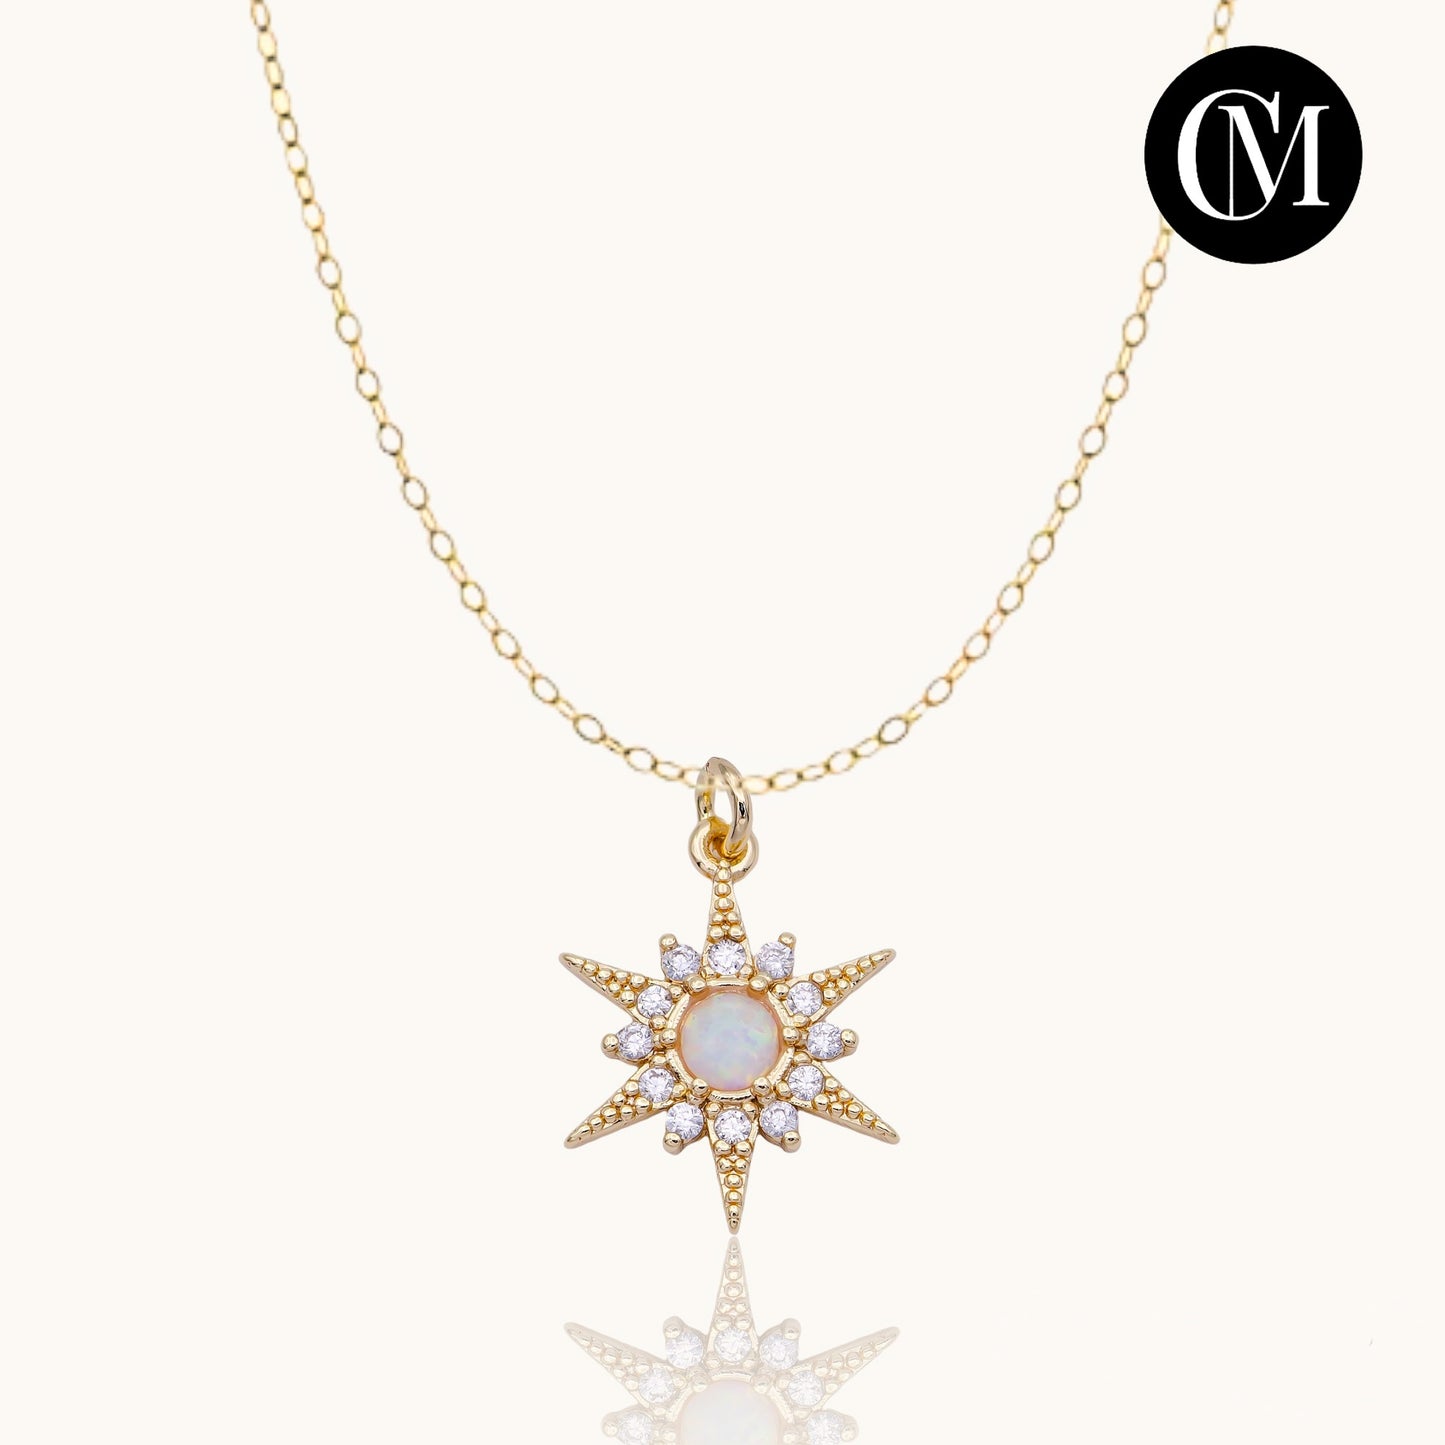 Celestial opal necklace - Gold Filled Micro Pave Opal Star Necklace